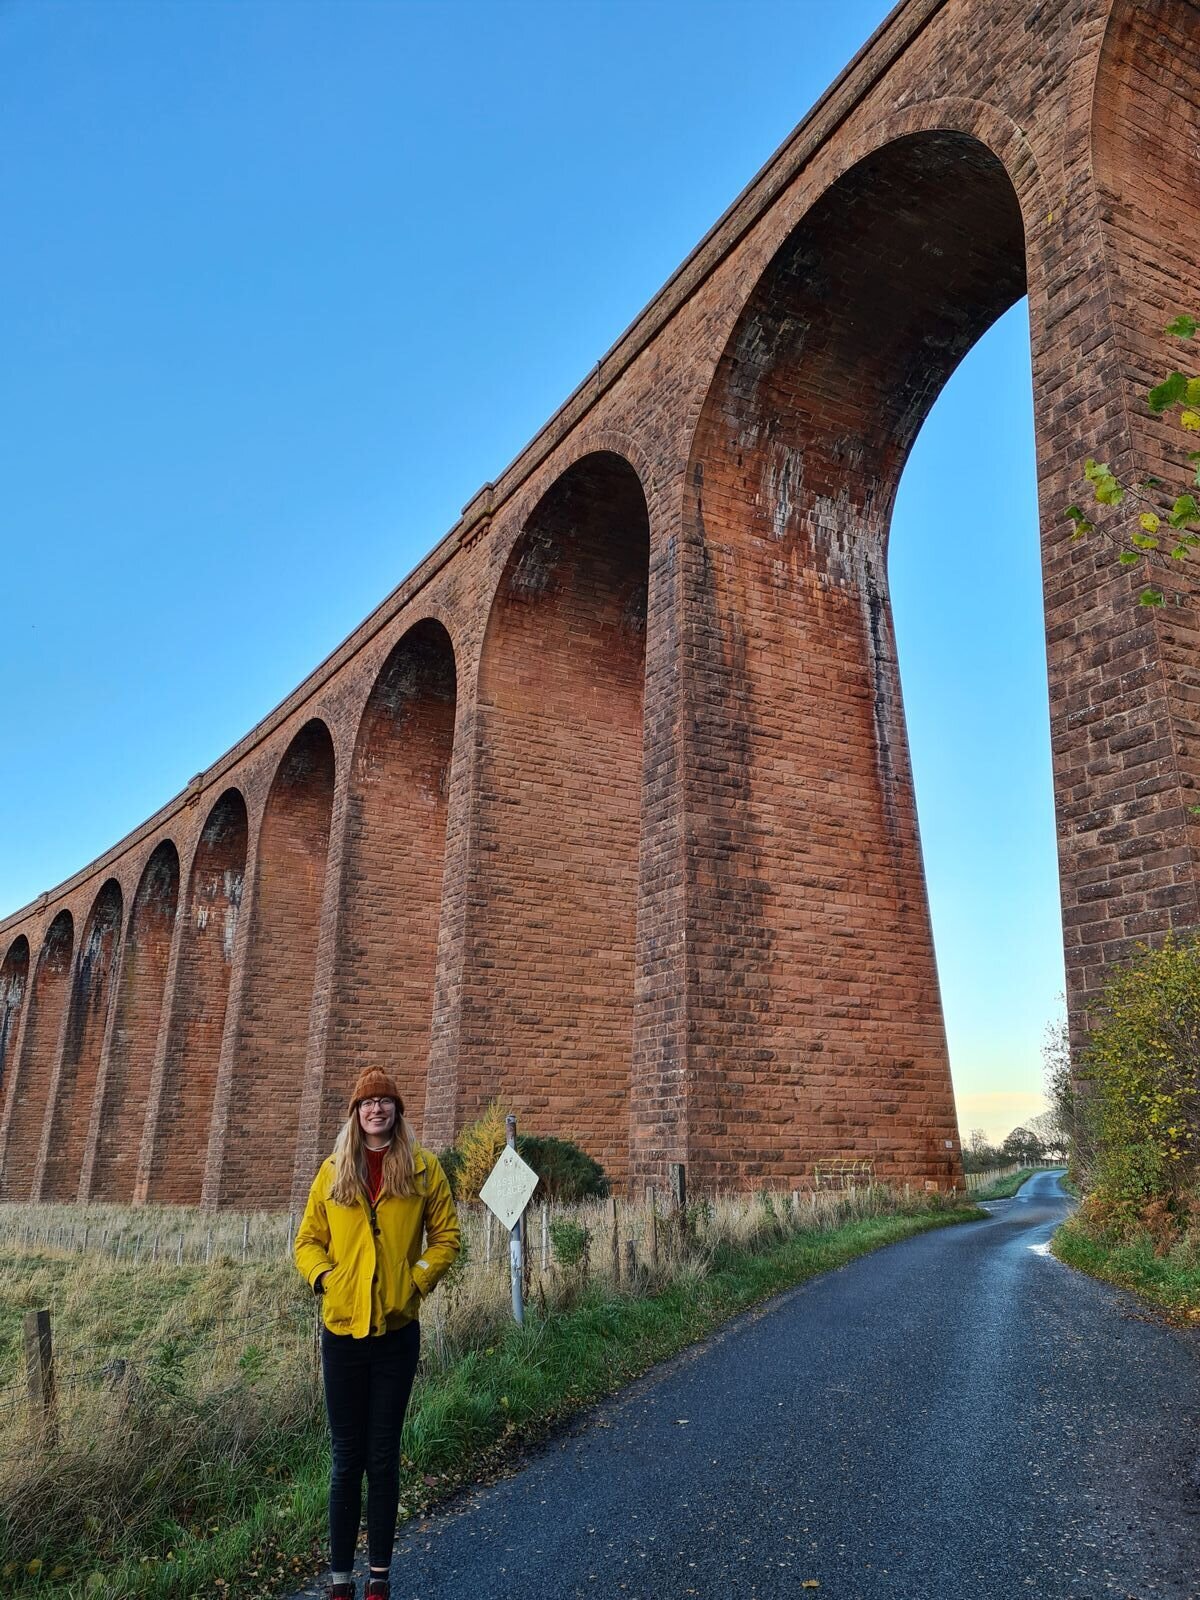 Nairn Viaduct, a large red brick stone viaduct looked at from below with a woman in a yellow jacket standing beneath it